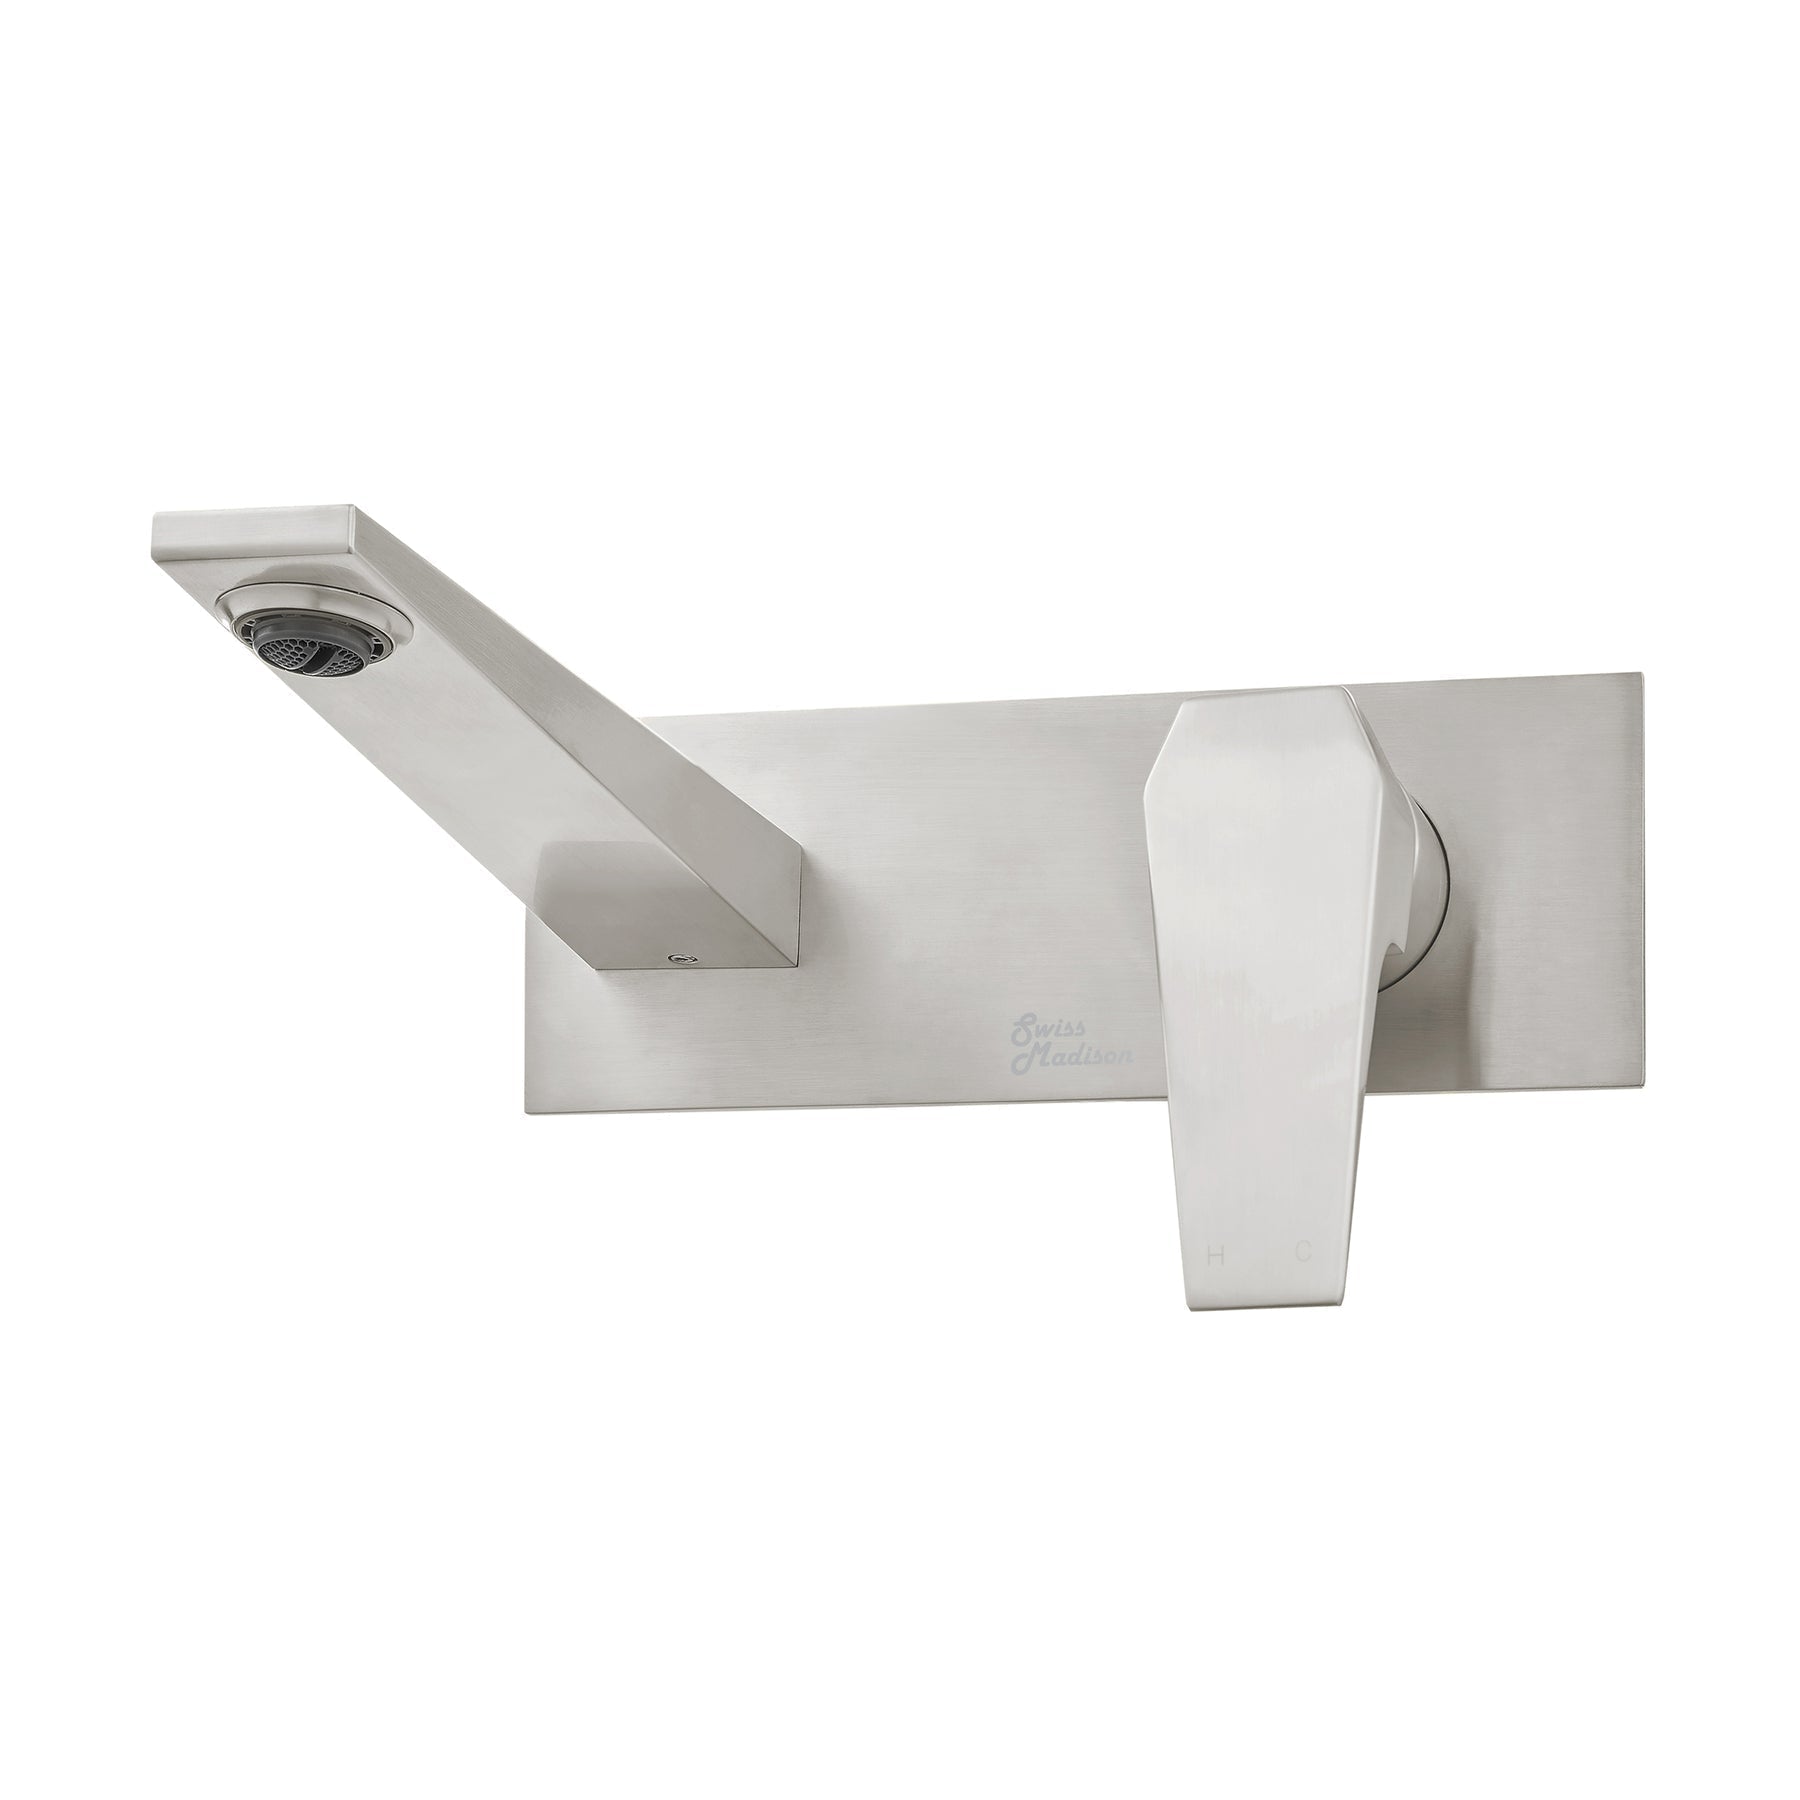 Swiss Madison Voltaire Single-Handle, Wall-Mount, Bathroom Faucet  SM-BF42